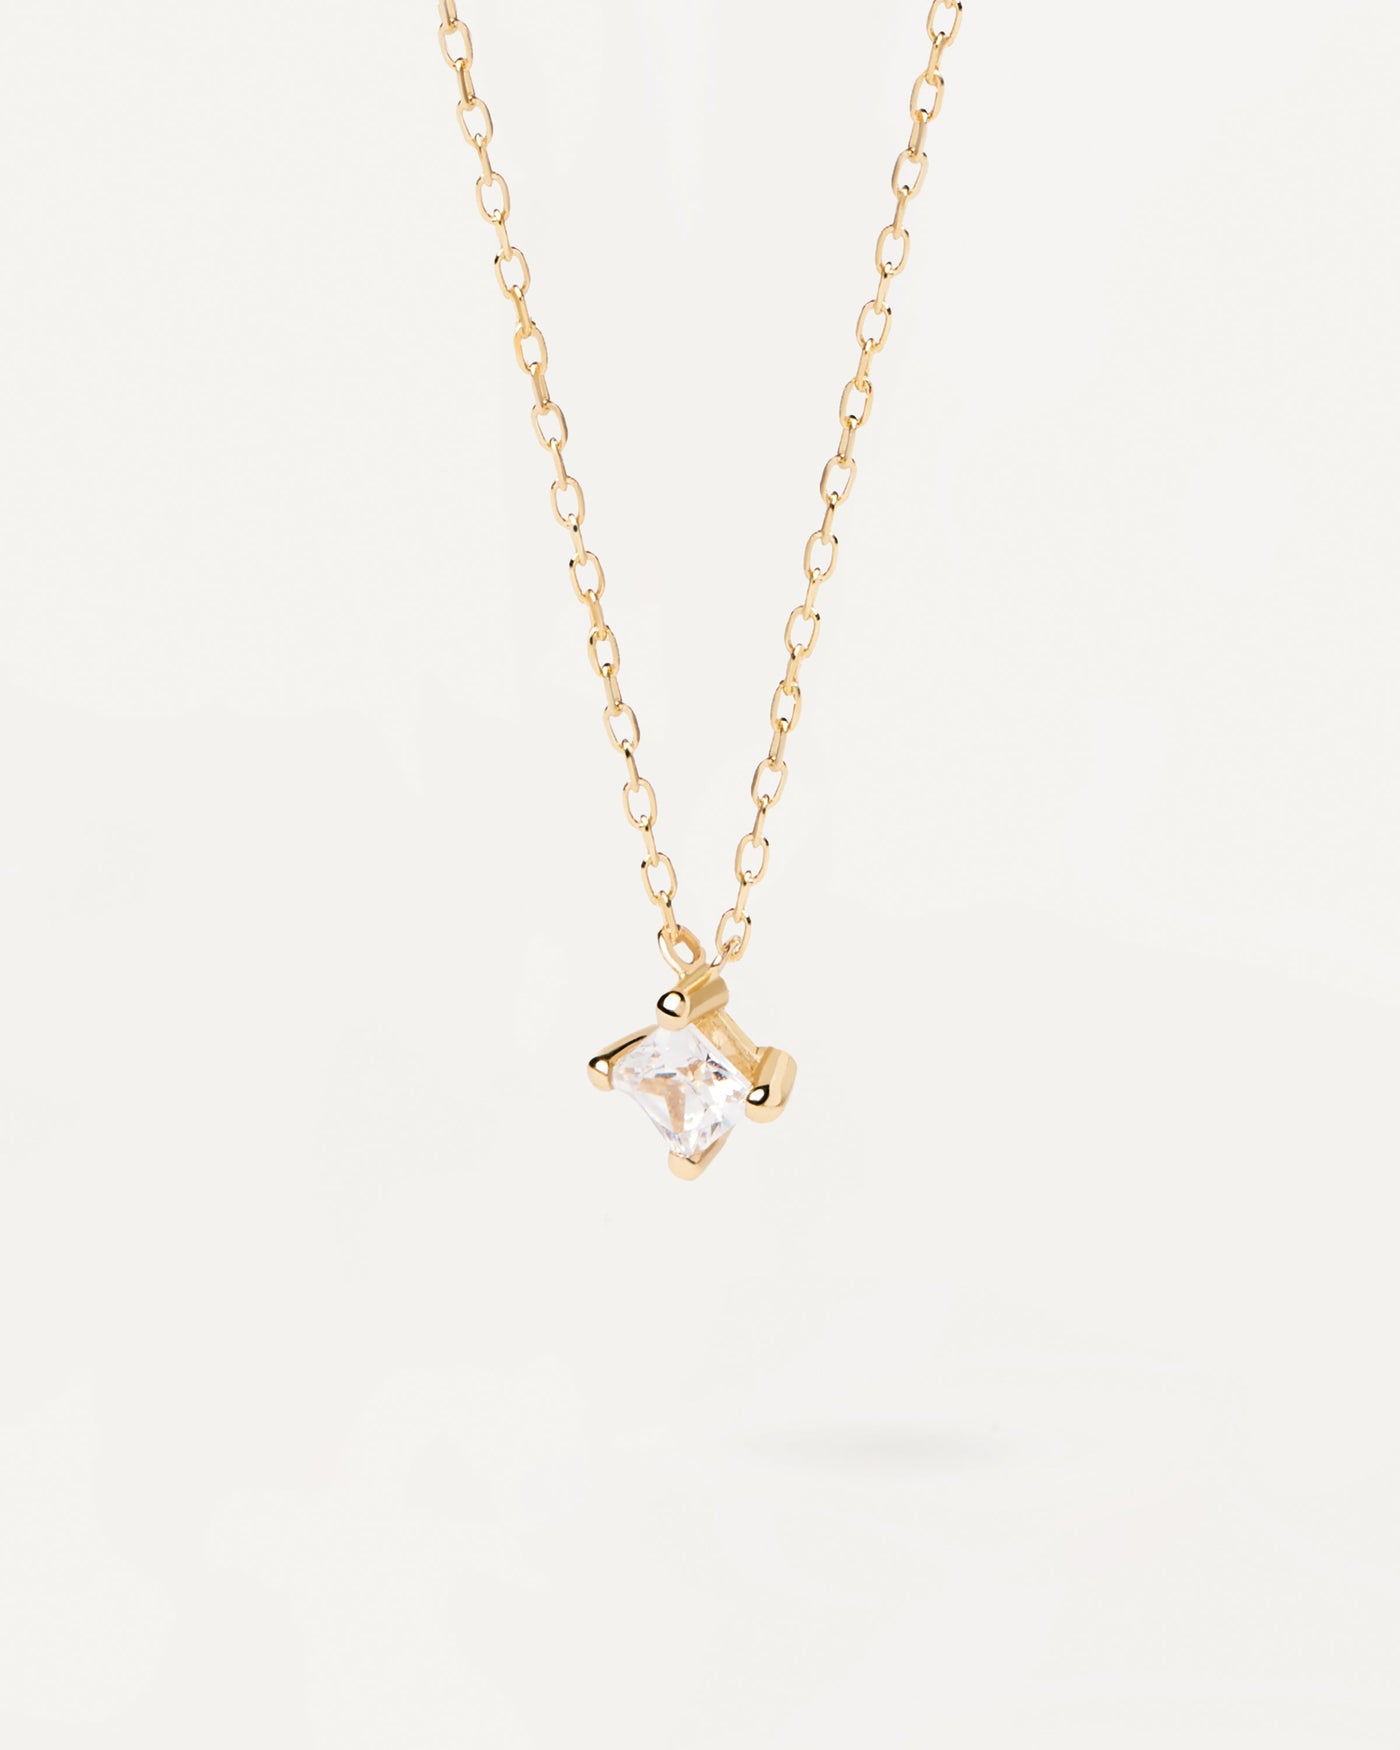 2023 Selection | Square Diamond And Gold Solitaire Necklace. 18K yellow gold necklace with squared princess diamond of 0.33 carat. Get the latest arrival from PDPAOLA. Place your order safely and get this Best Seller. Free Shipping.